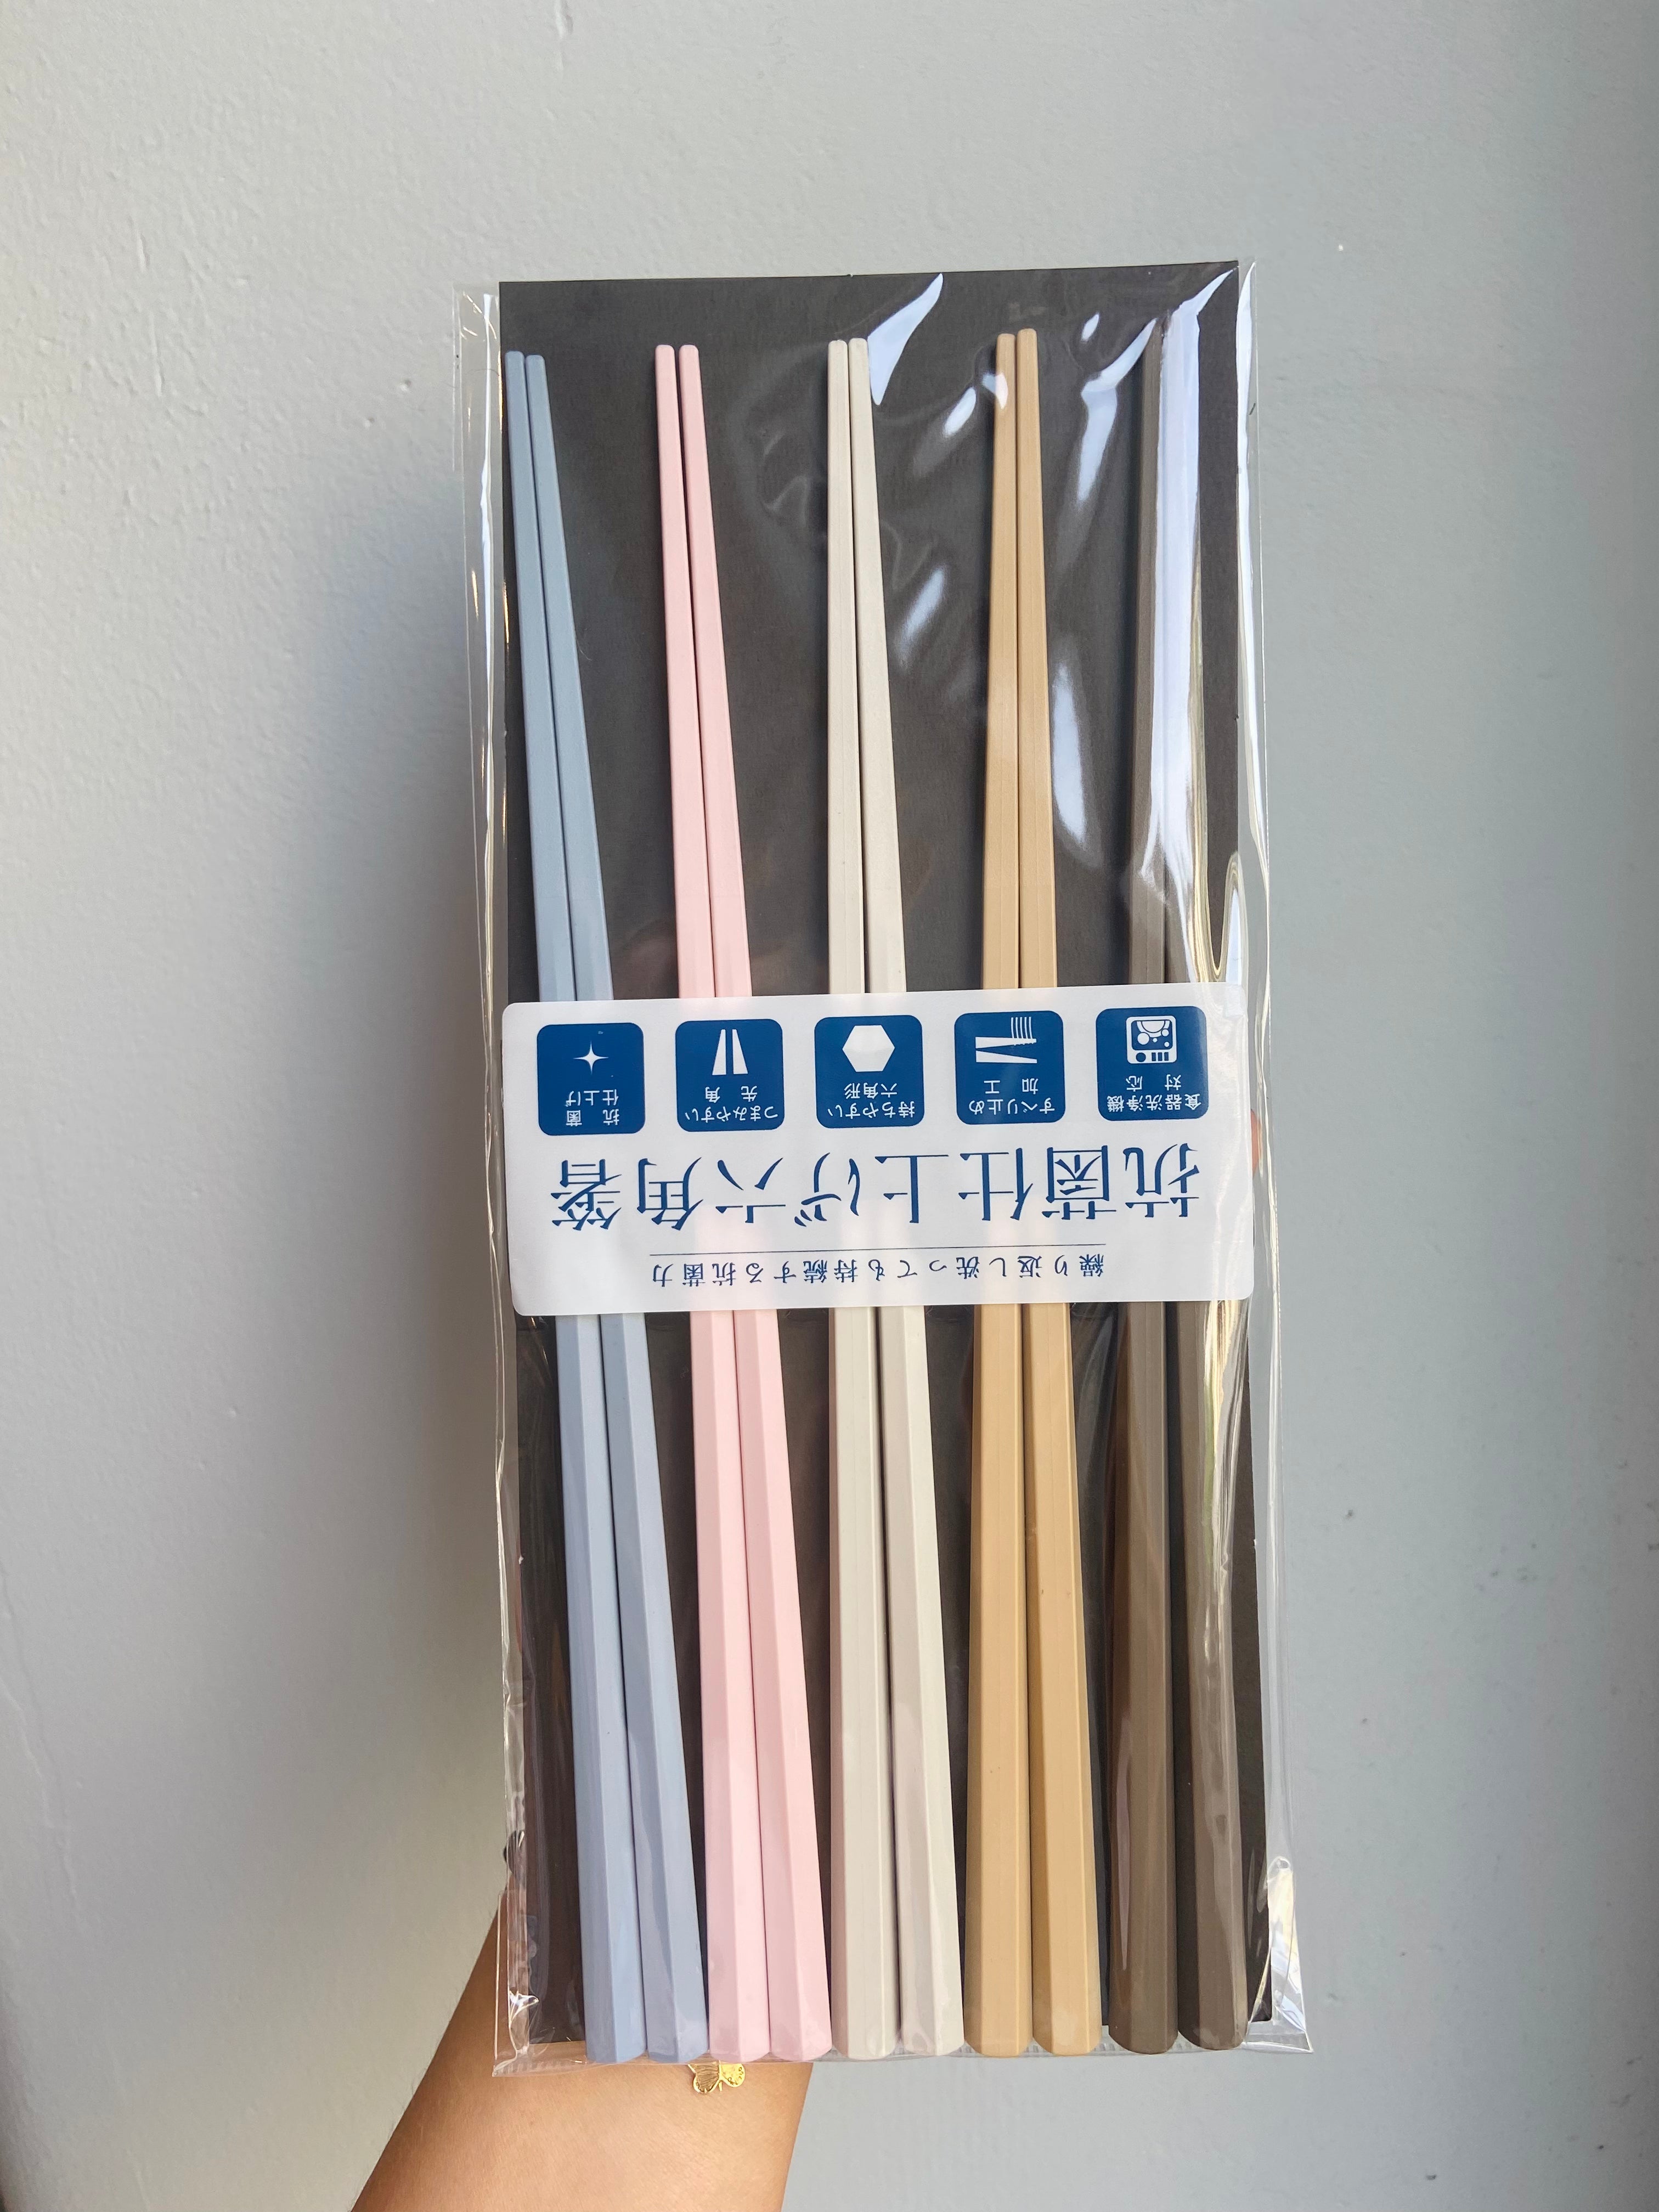 Chopsticks in muted colors